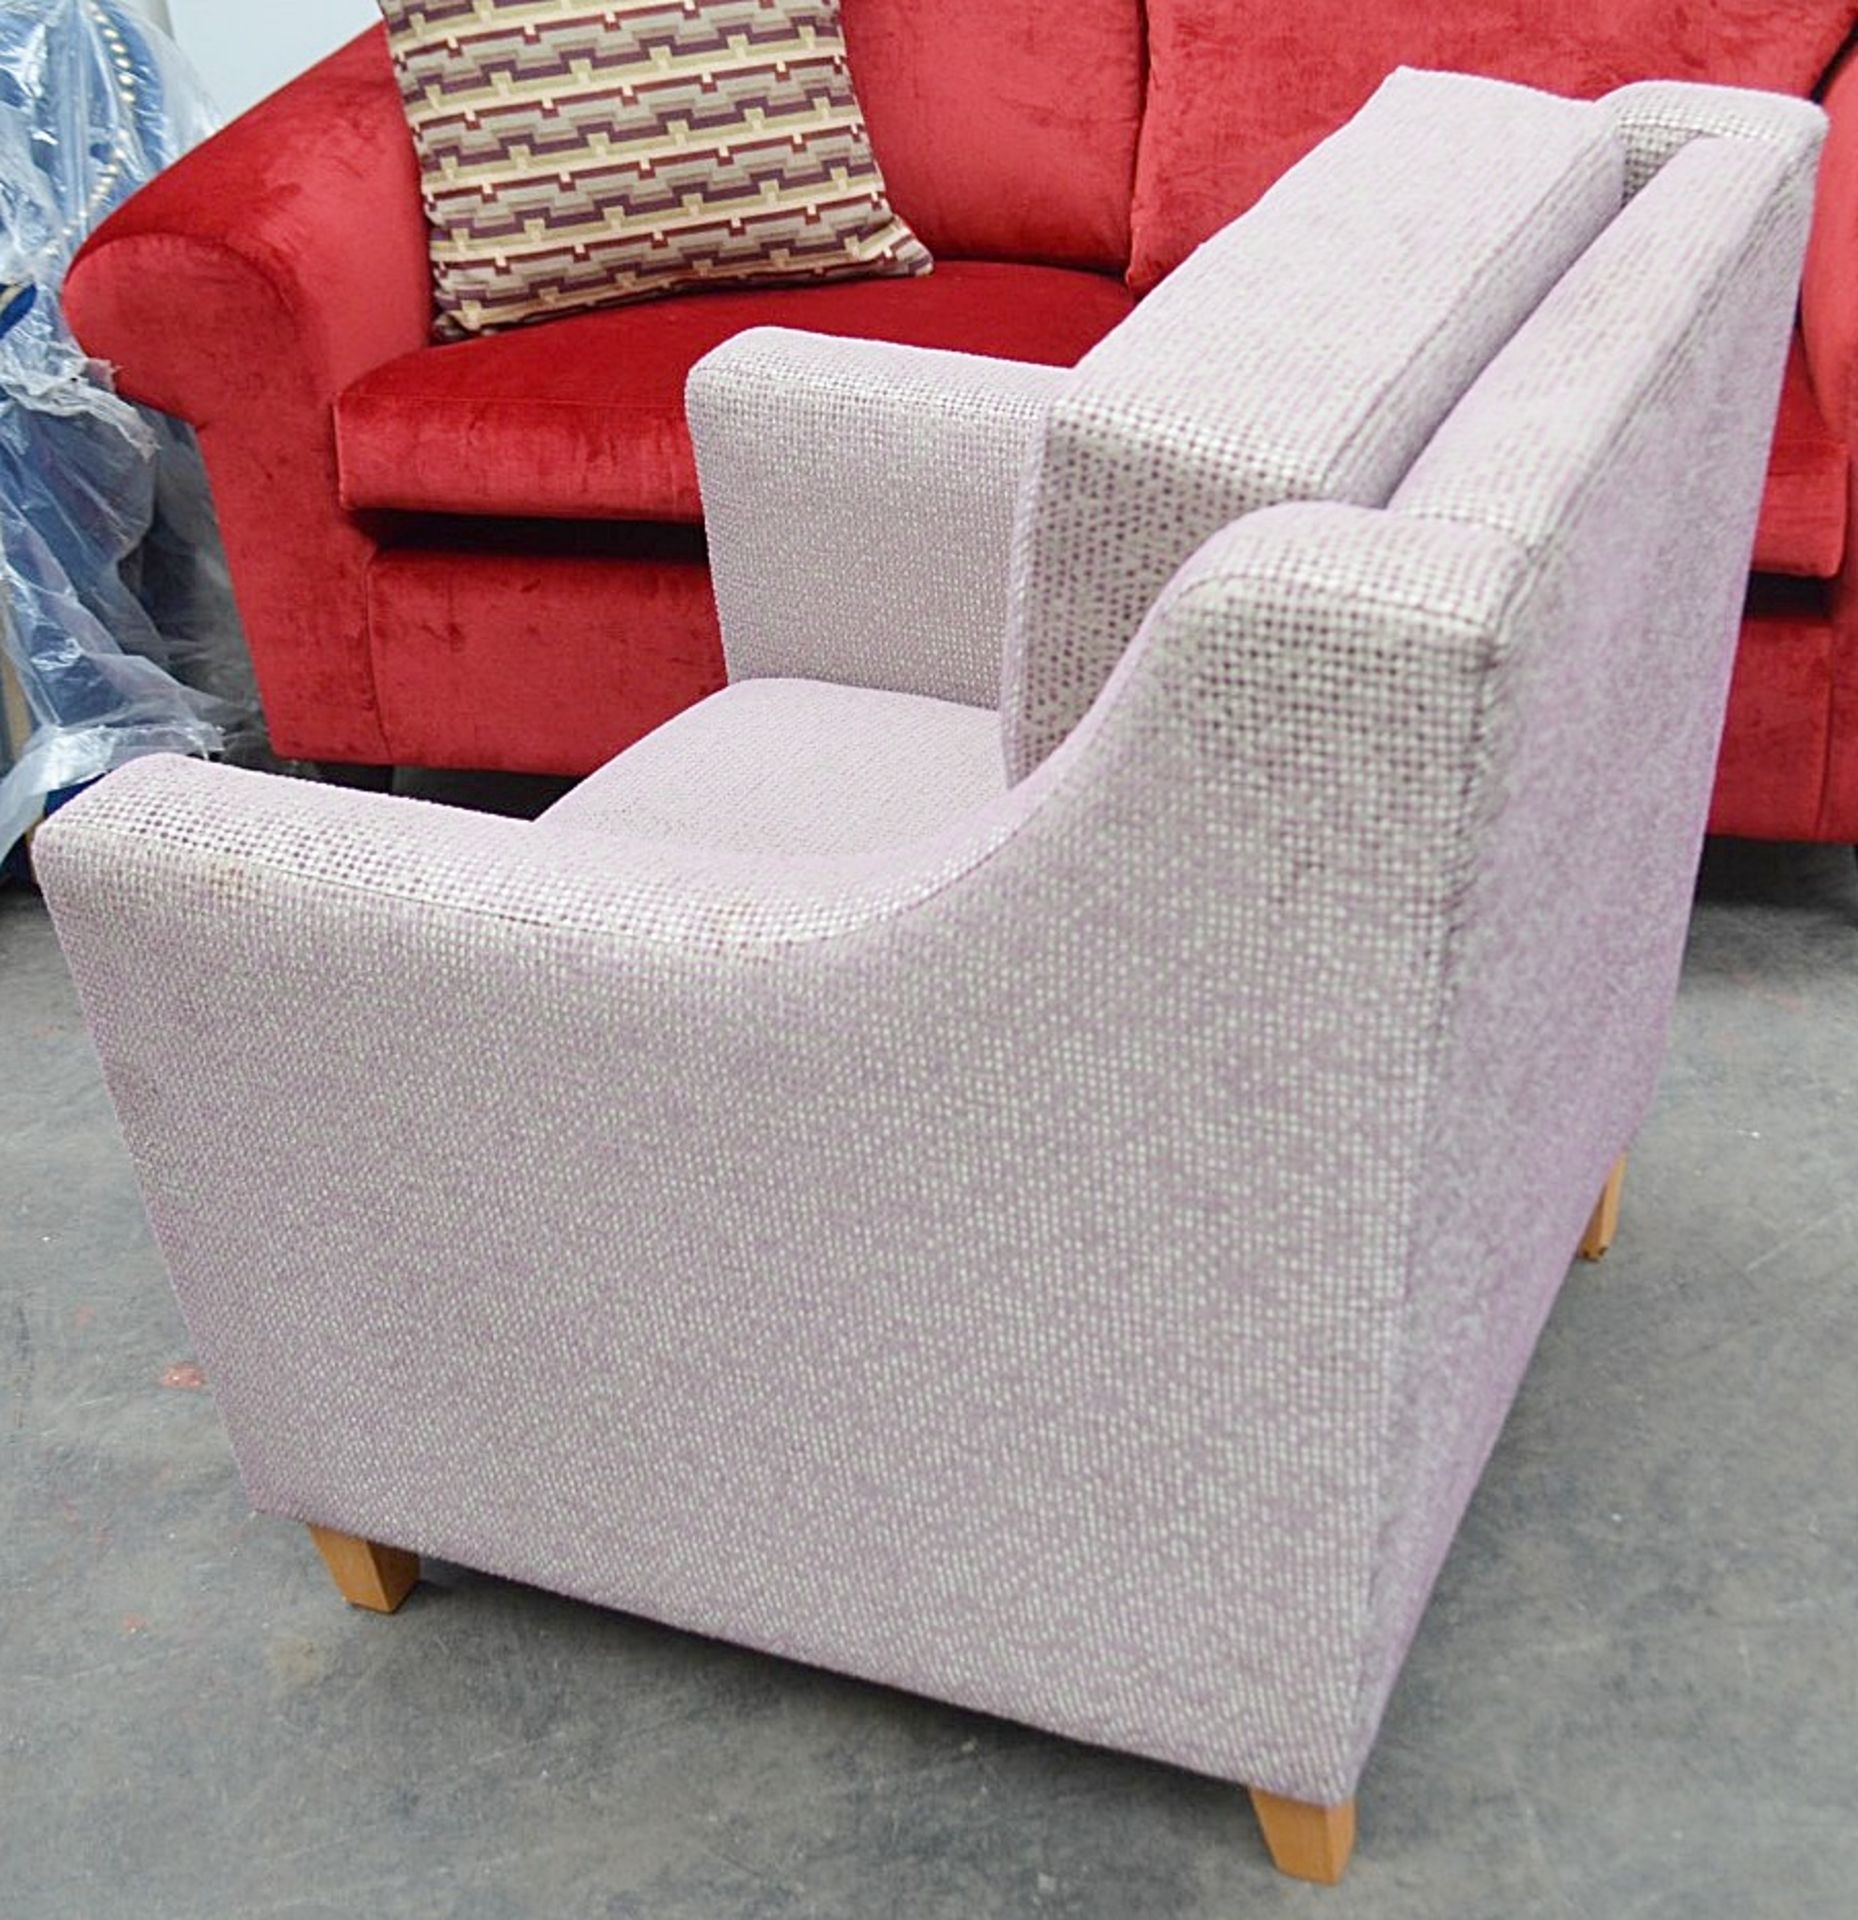 1 x Large Commercial Armchair Upholstered In A Grey & Purple Premium Fabric - Image 5 of 7